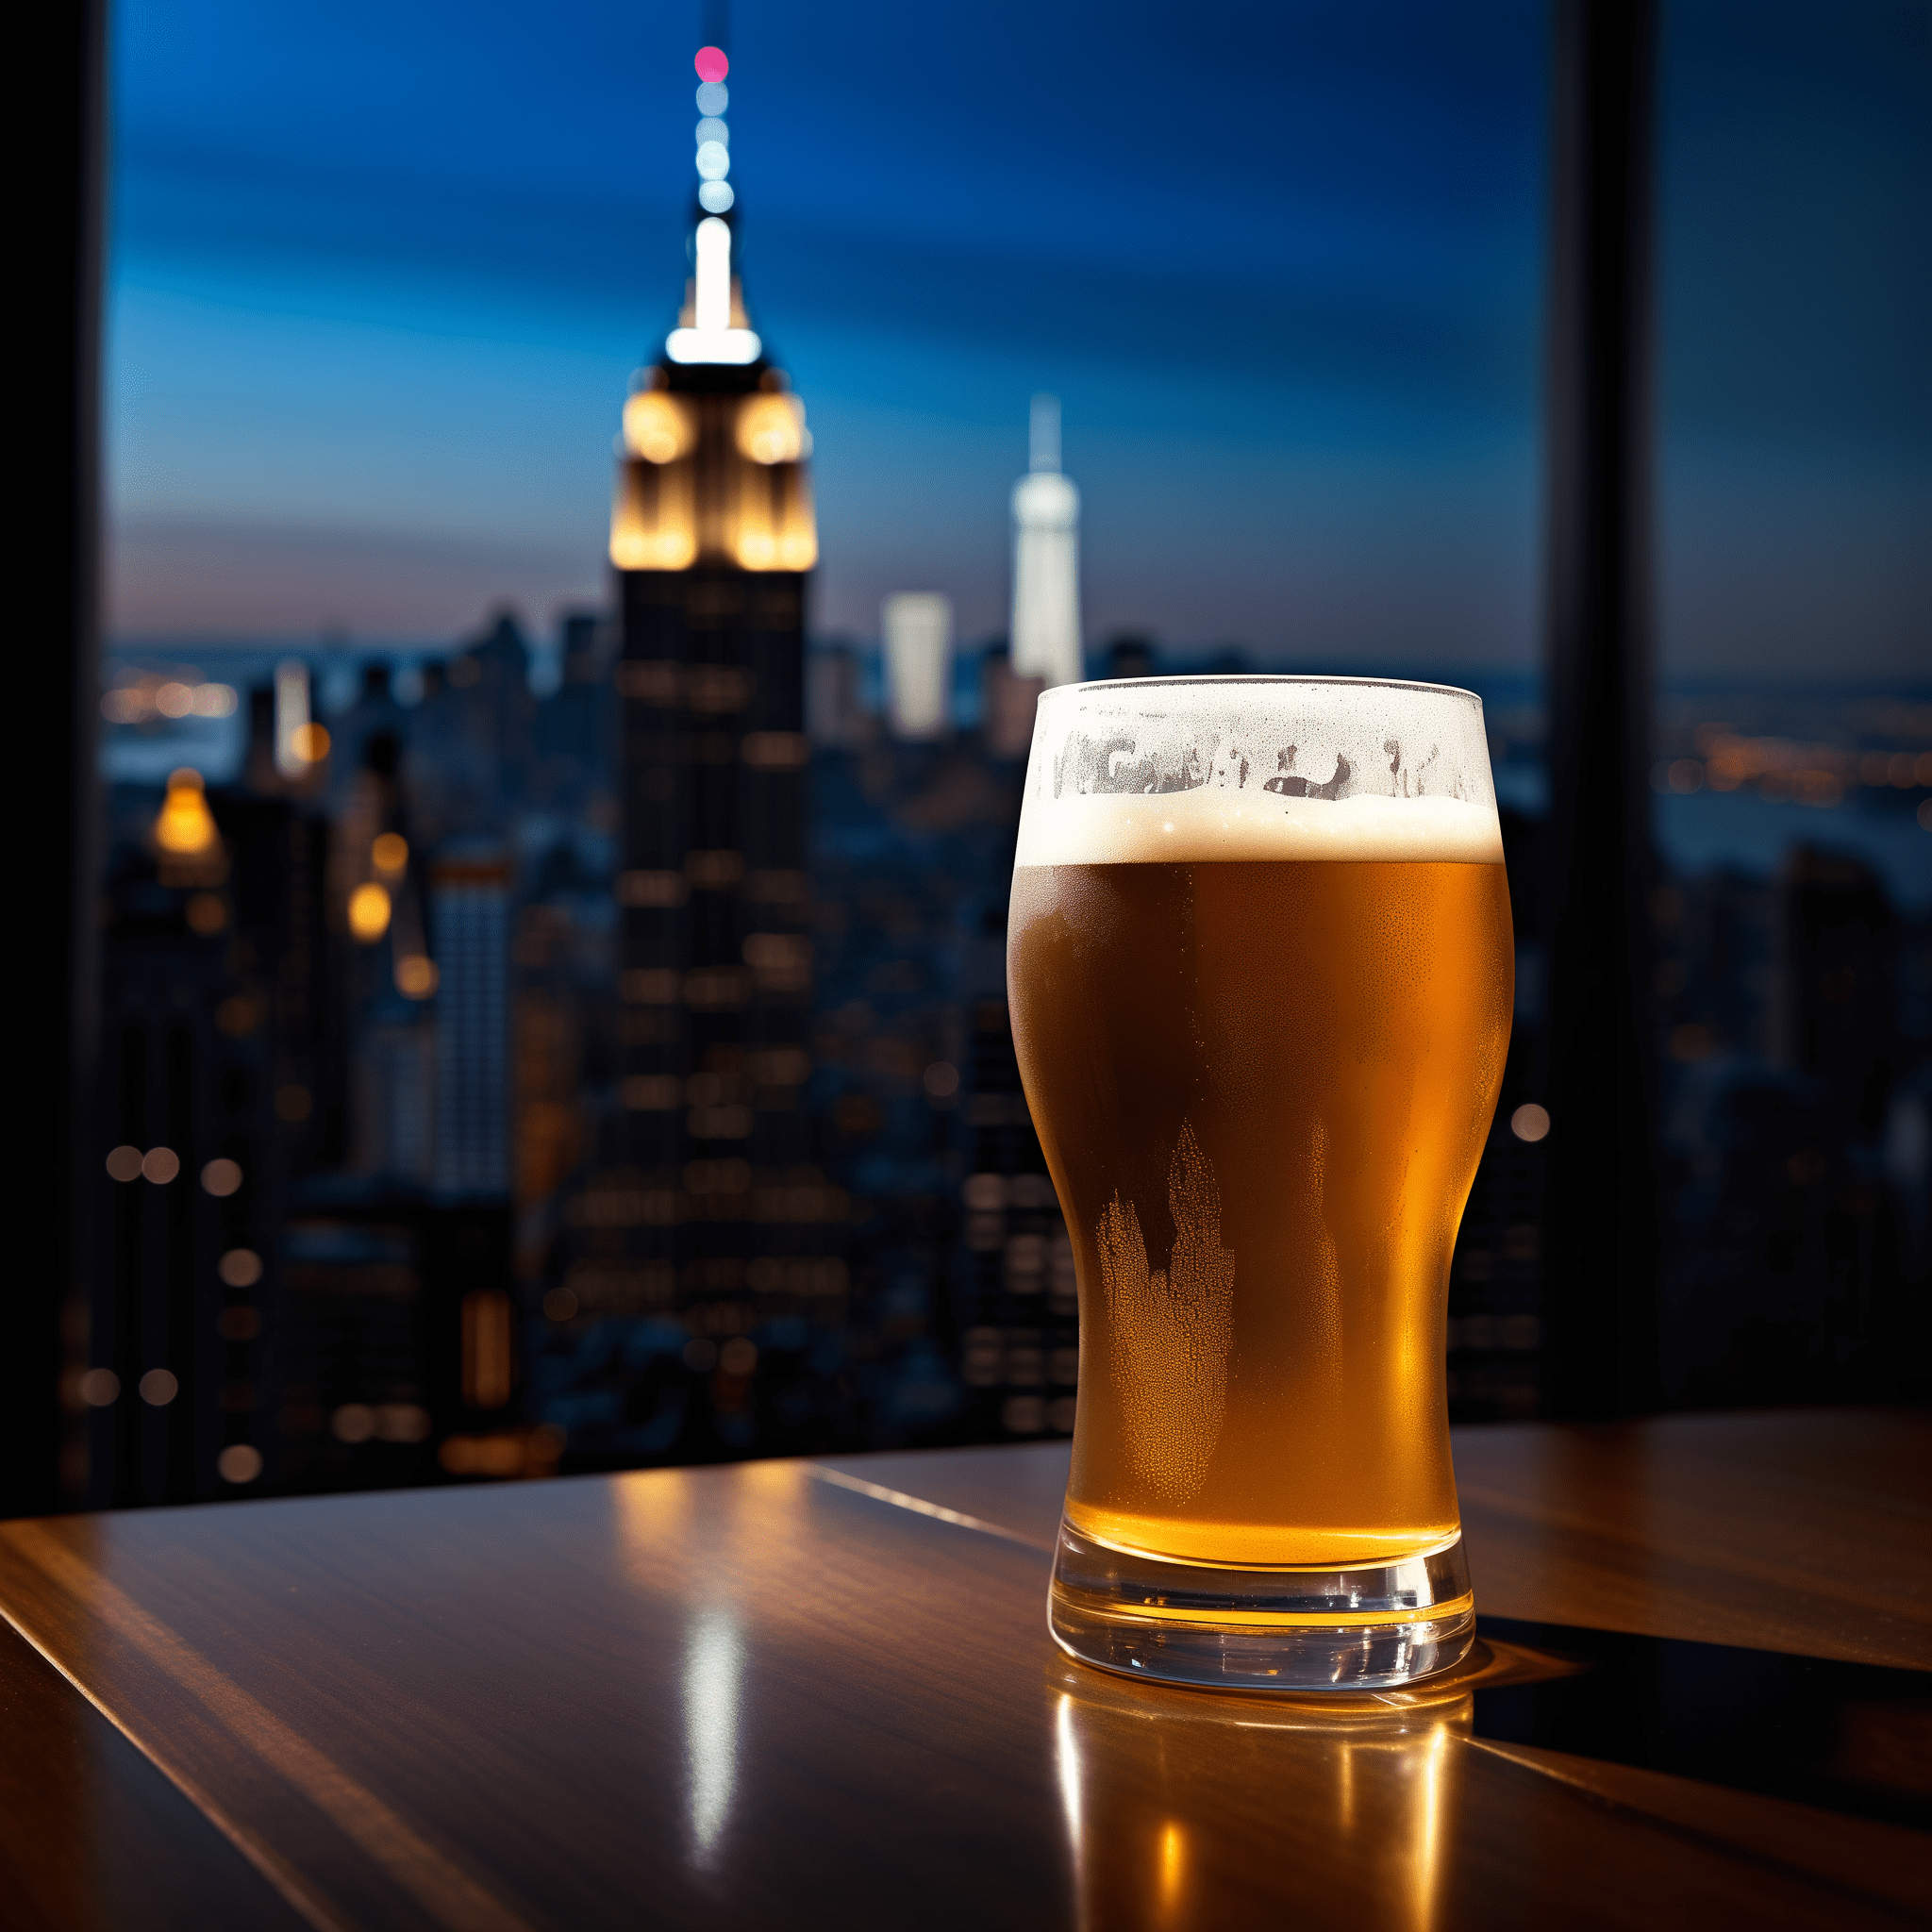 New York Bomb Recipe - The New York Bomb offers a robust and warming flavor from the cognac, combined with the crisp and refreshing finish of lager beer. It's a juxtaposition of strong and smooth, with a rich complexity.